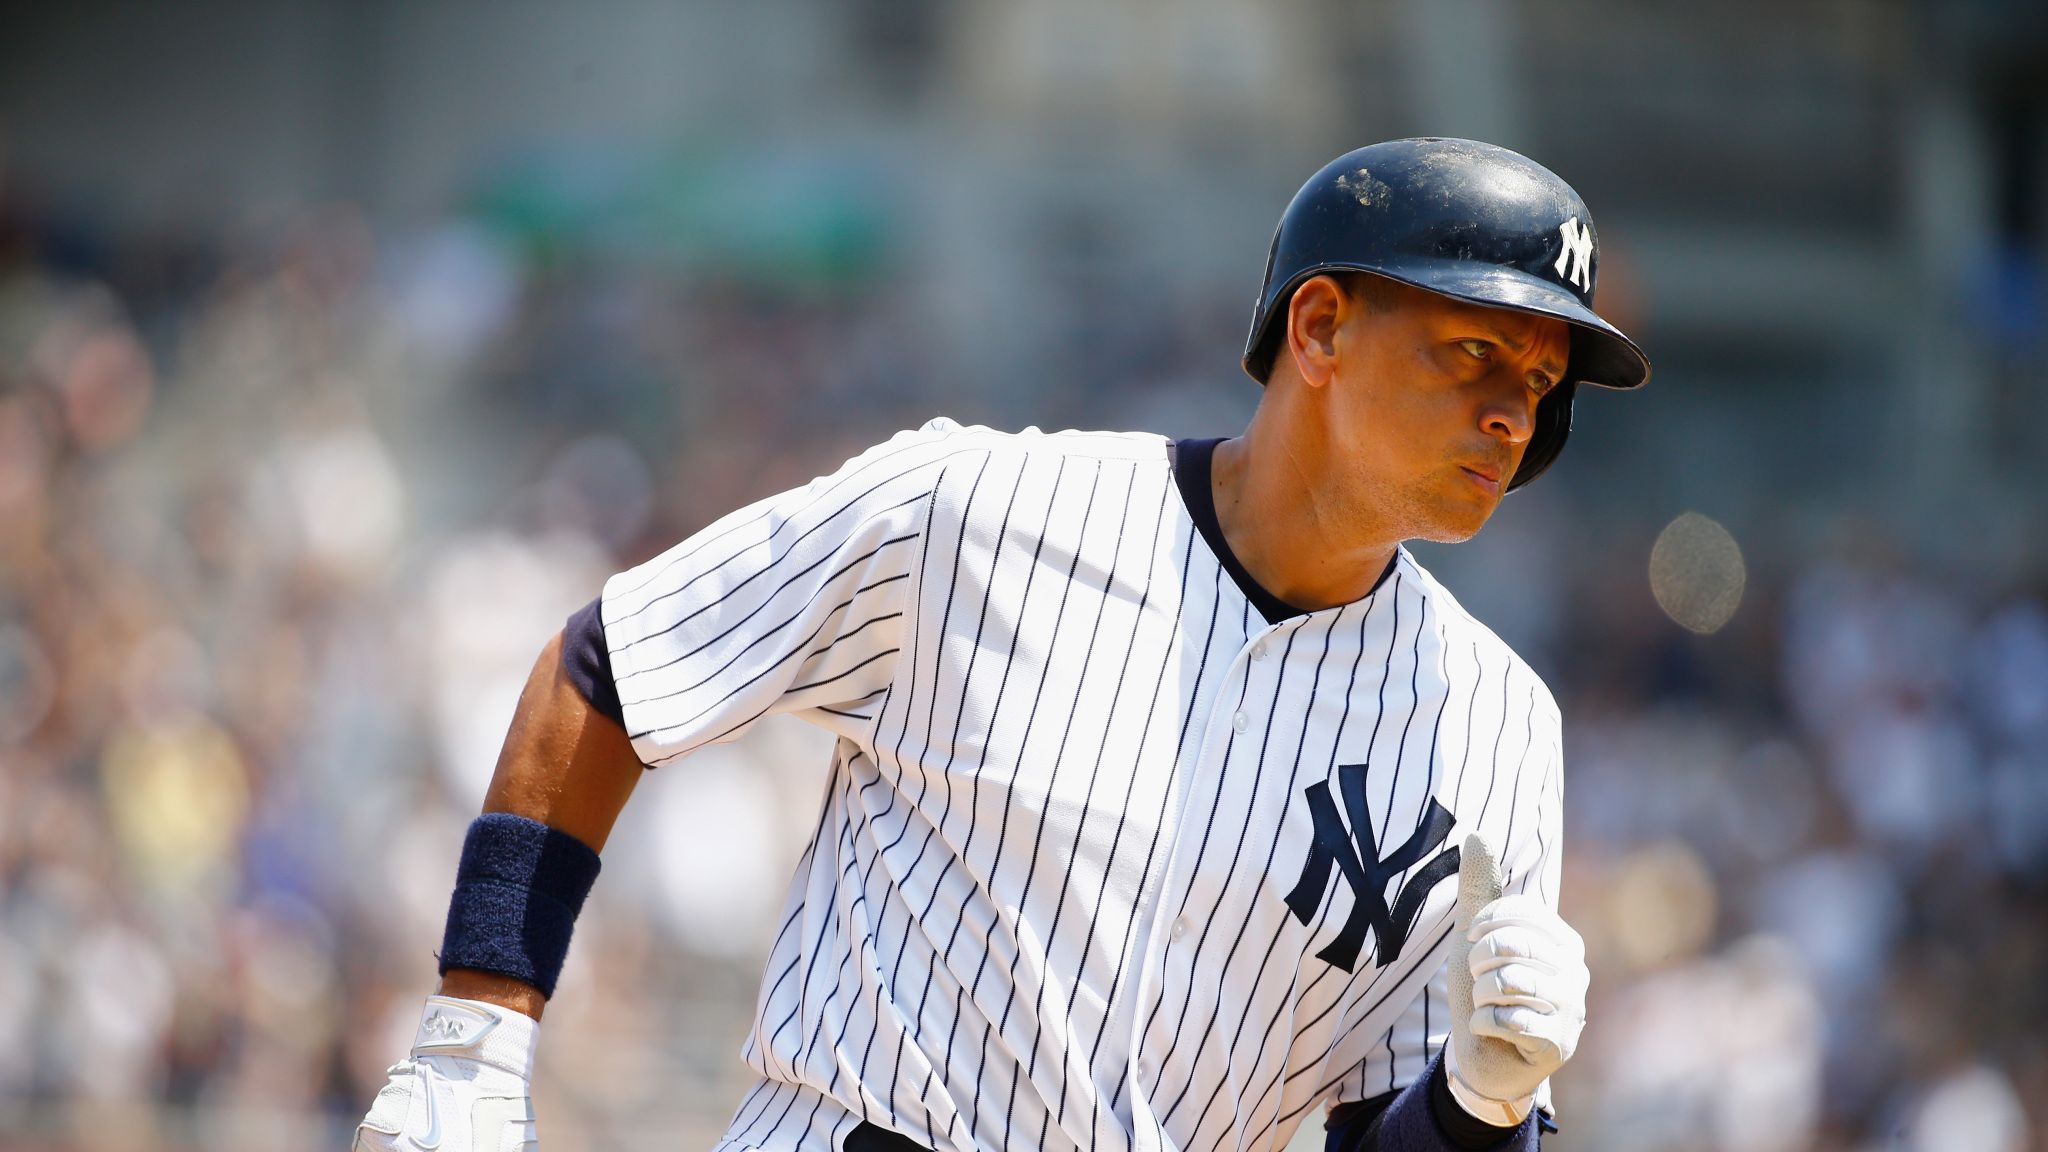 The Top A-Rod Moments in Alex Rodriguez's Career